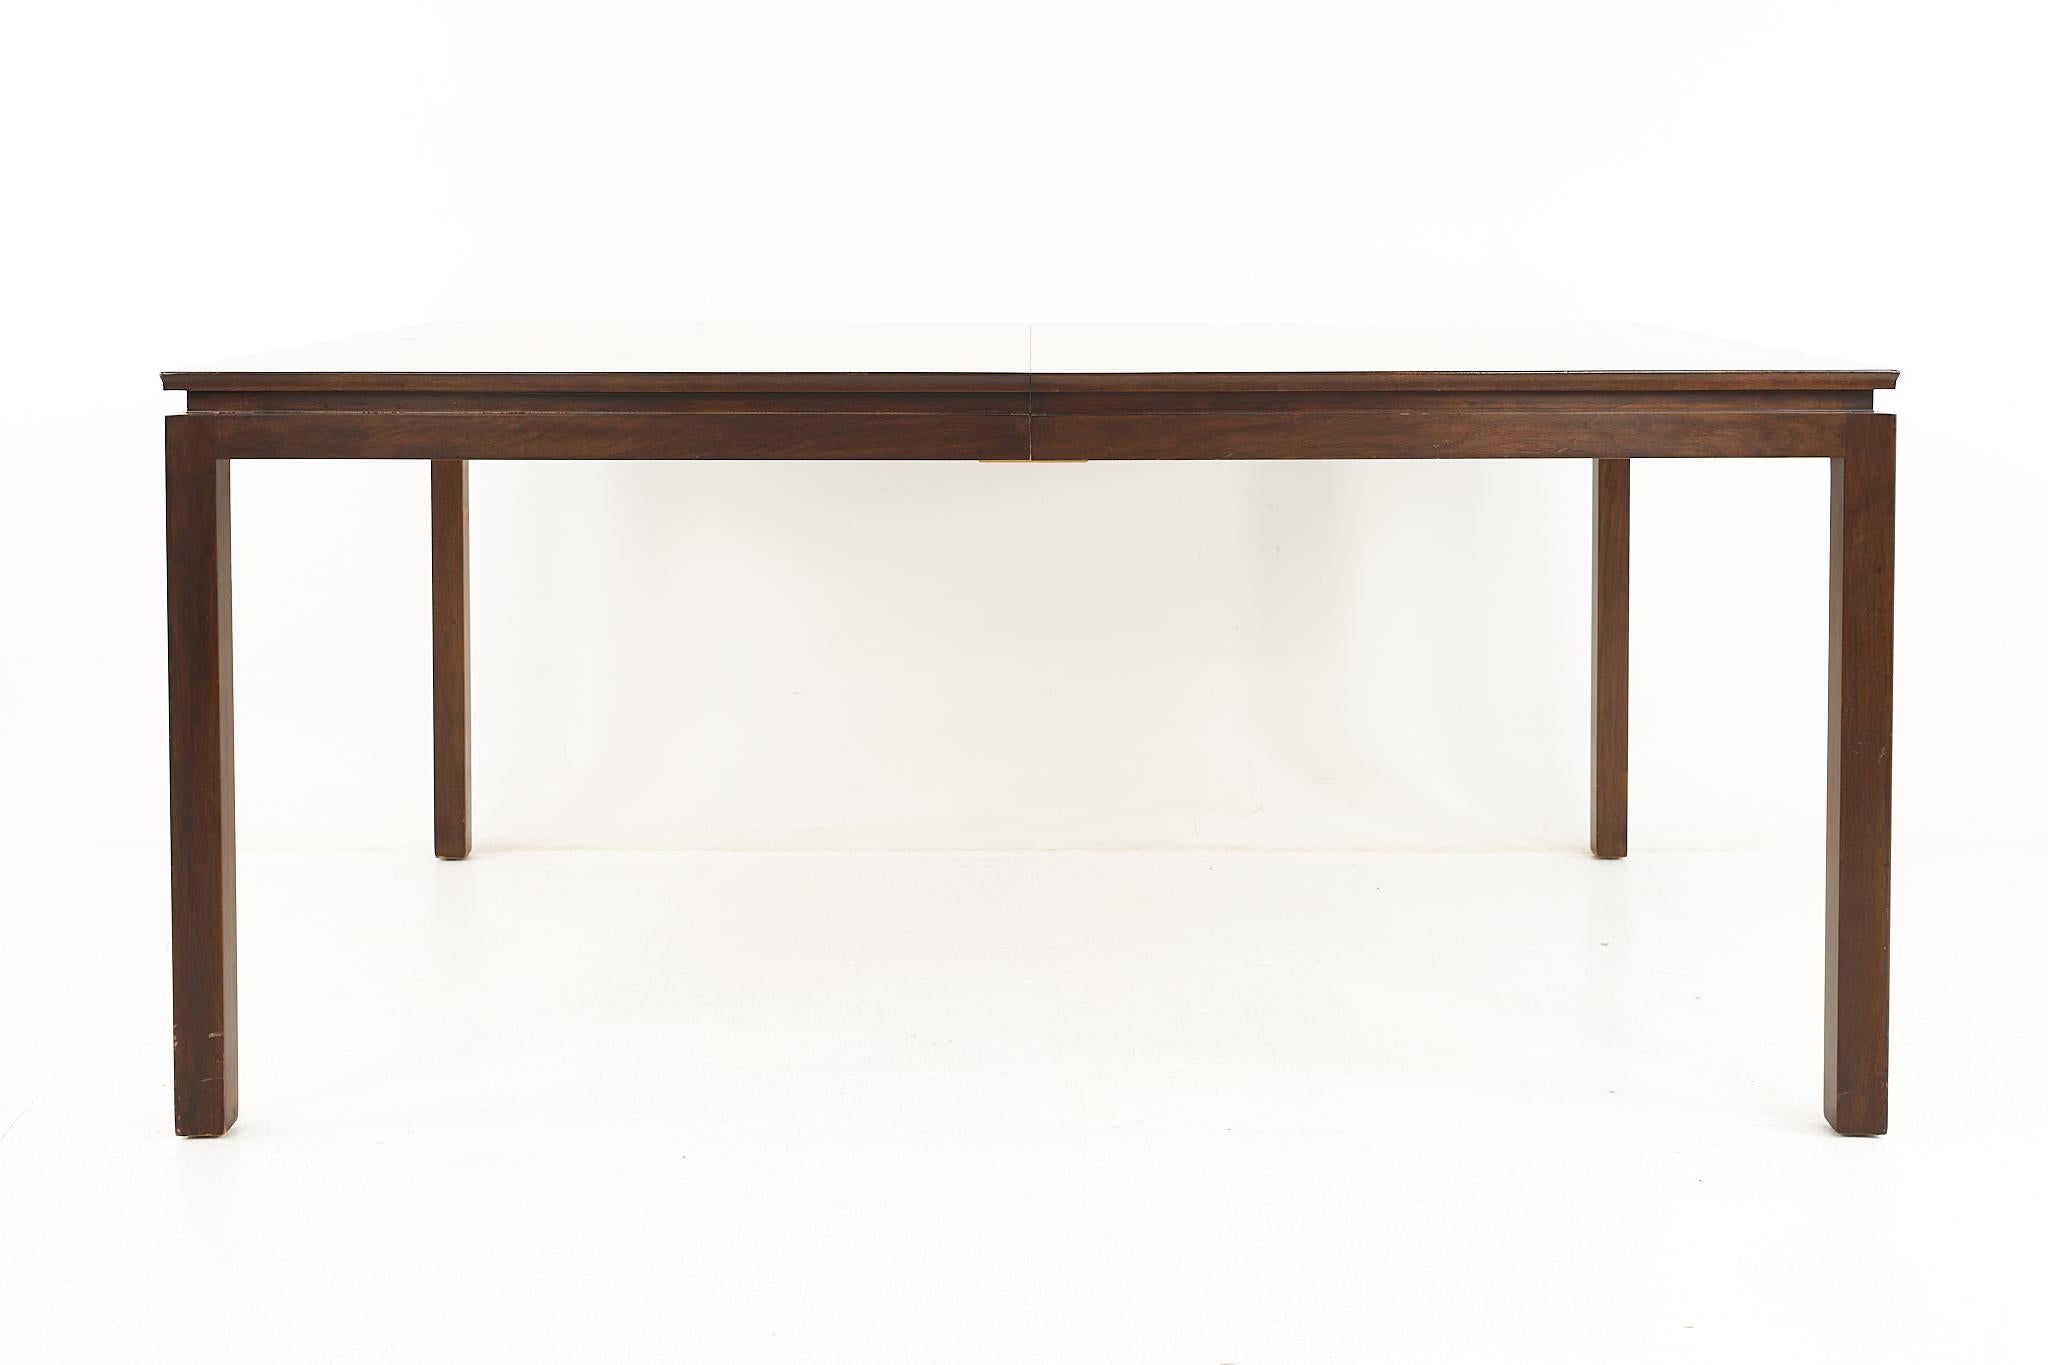 Edward Wormley For Dunbar Mid Century Mahogany and Walnut Two Tone Expanding Dining Table With 3 leaves

The table measures: 66.25 wide x 44.25 deep x 29.5 high, with a chair clearance of 26.25 inches; each leaf is 24 inches wide, making a maximum